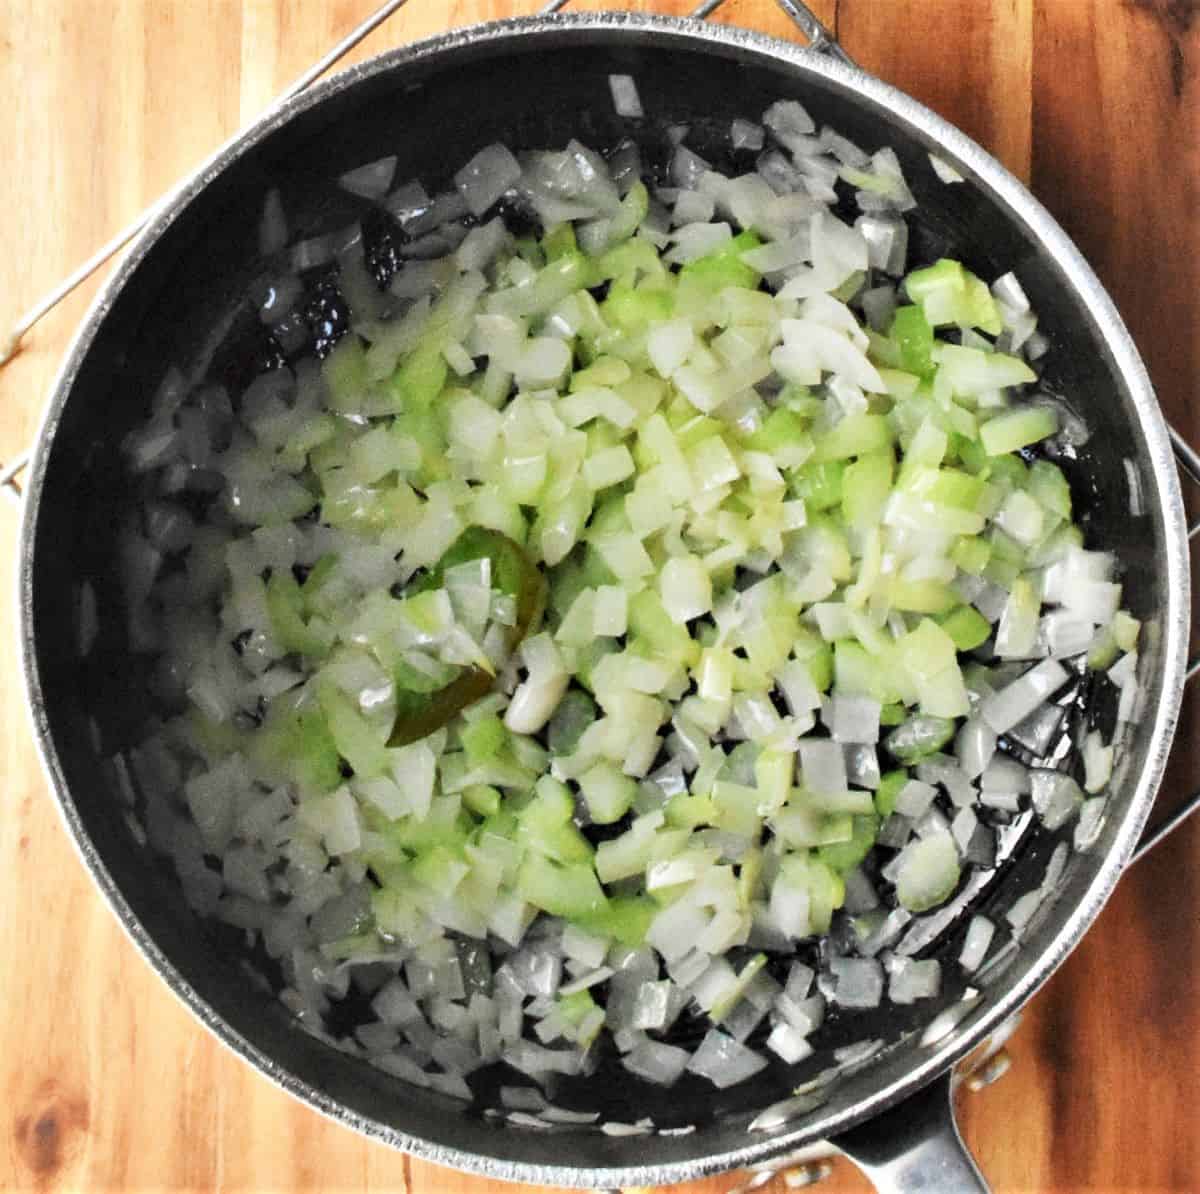 Cooking onion and celery in soup pot.